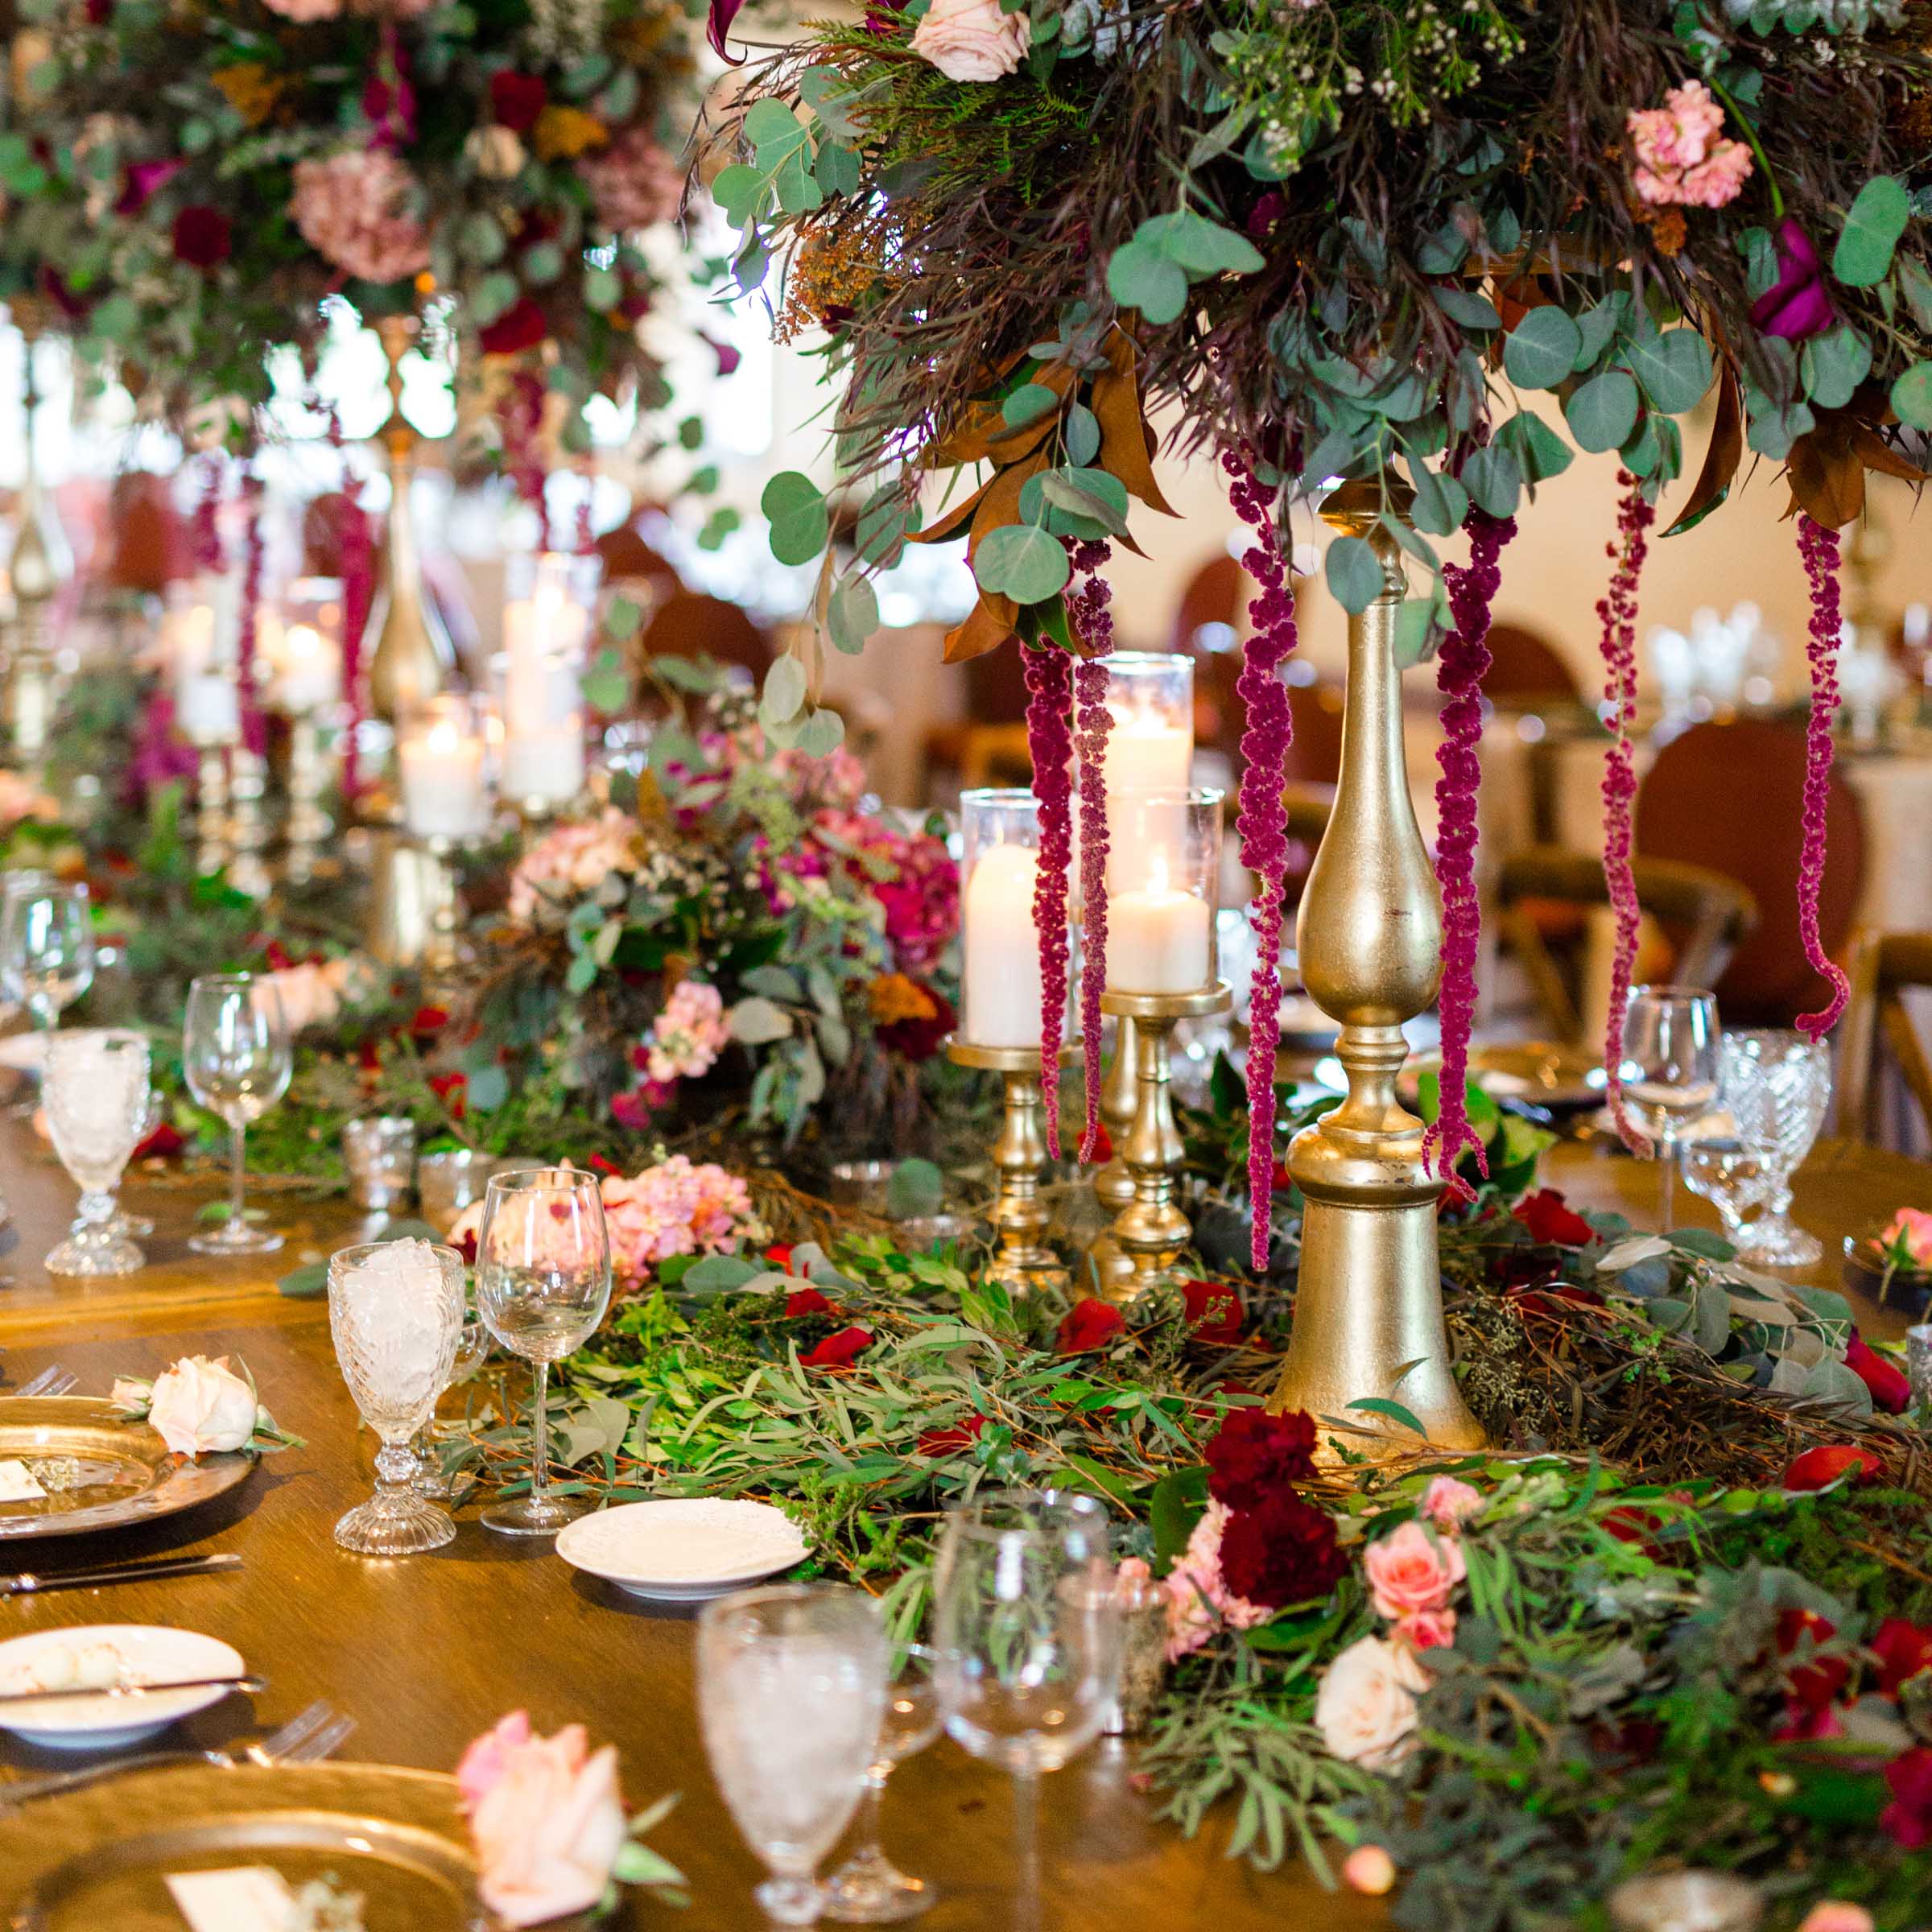 colorado golf club wedding, denver wedding planner, reception decor, kings table, tall floral centerpieces, gold chargers, autumn wedding decor, fall wedding inspiration, sweetly paired wedding planners